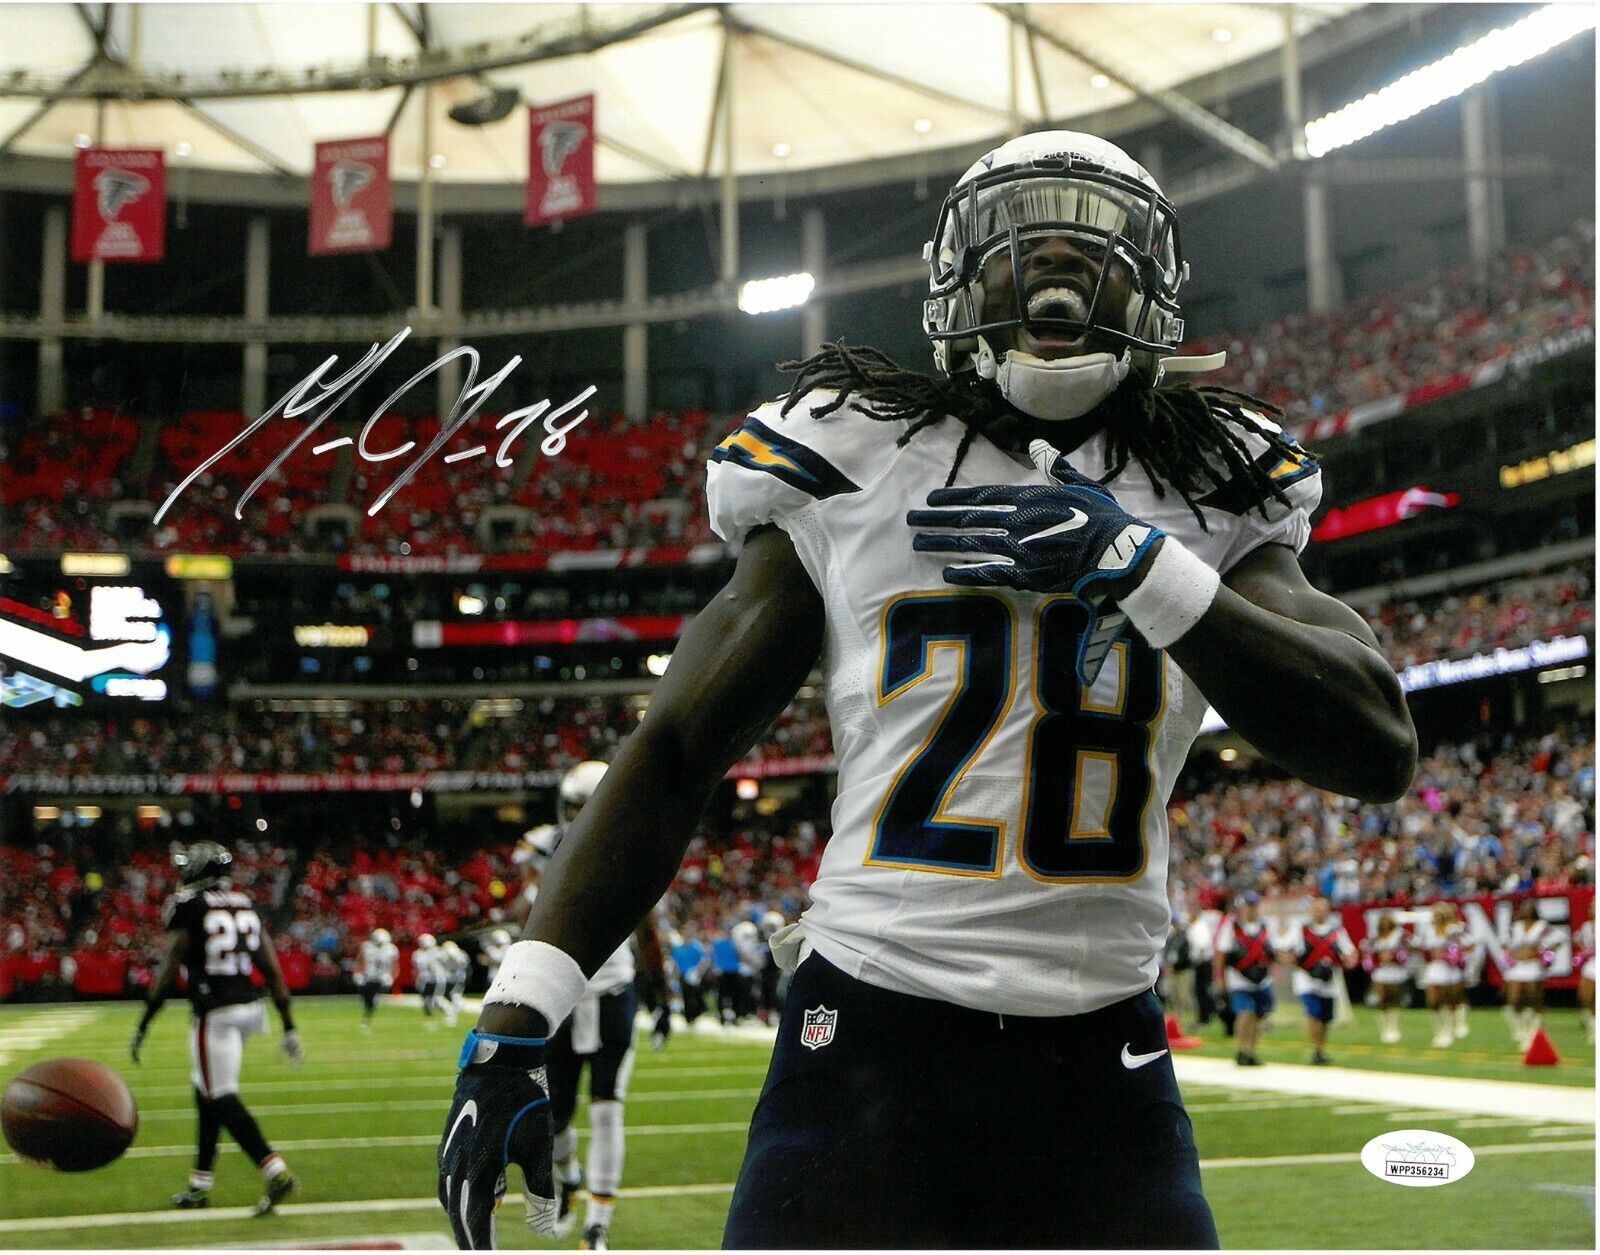 Melvin Gordon Signed 11x14 Photo Autographed JSA ITP COA San Diego Chargers 34